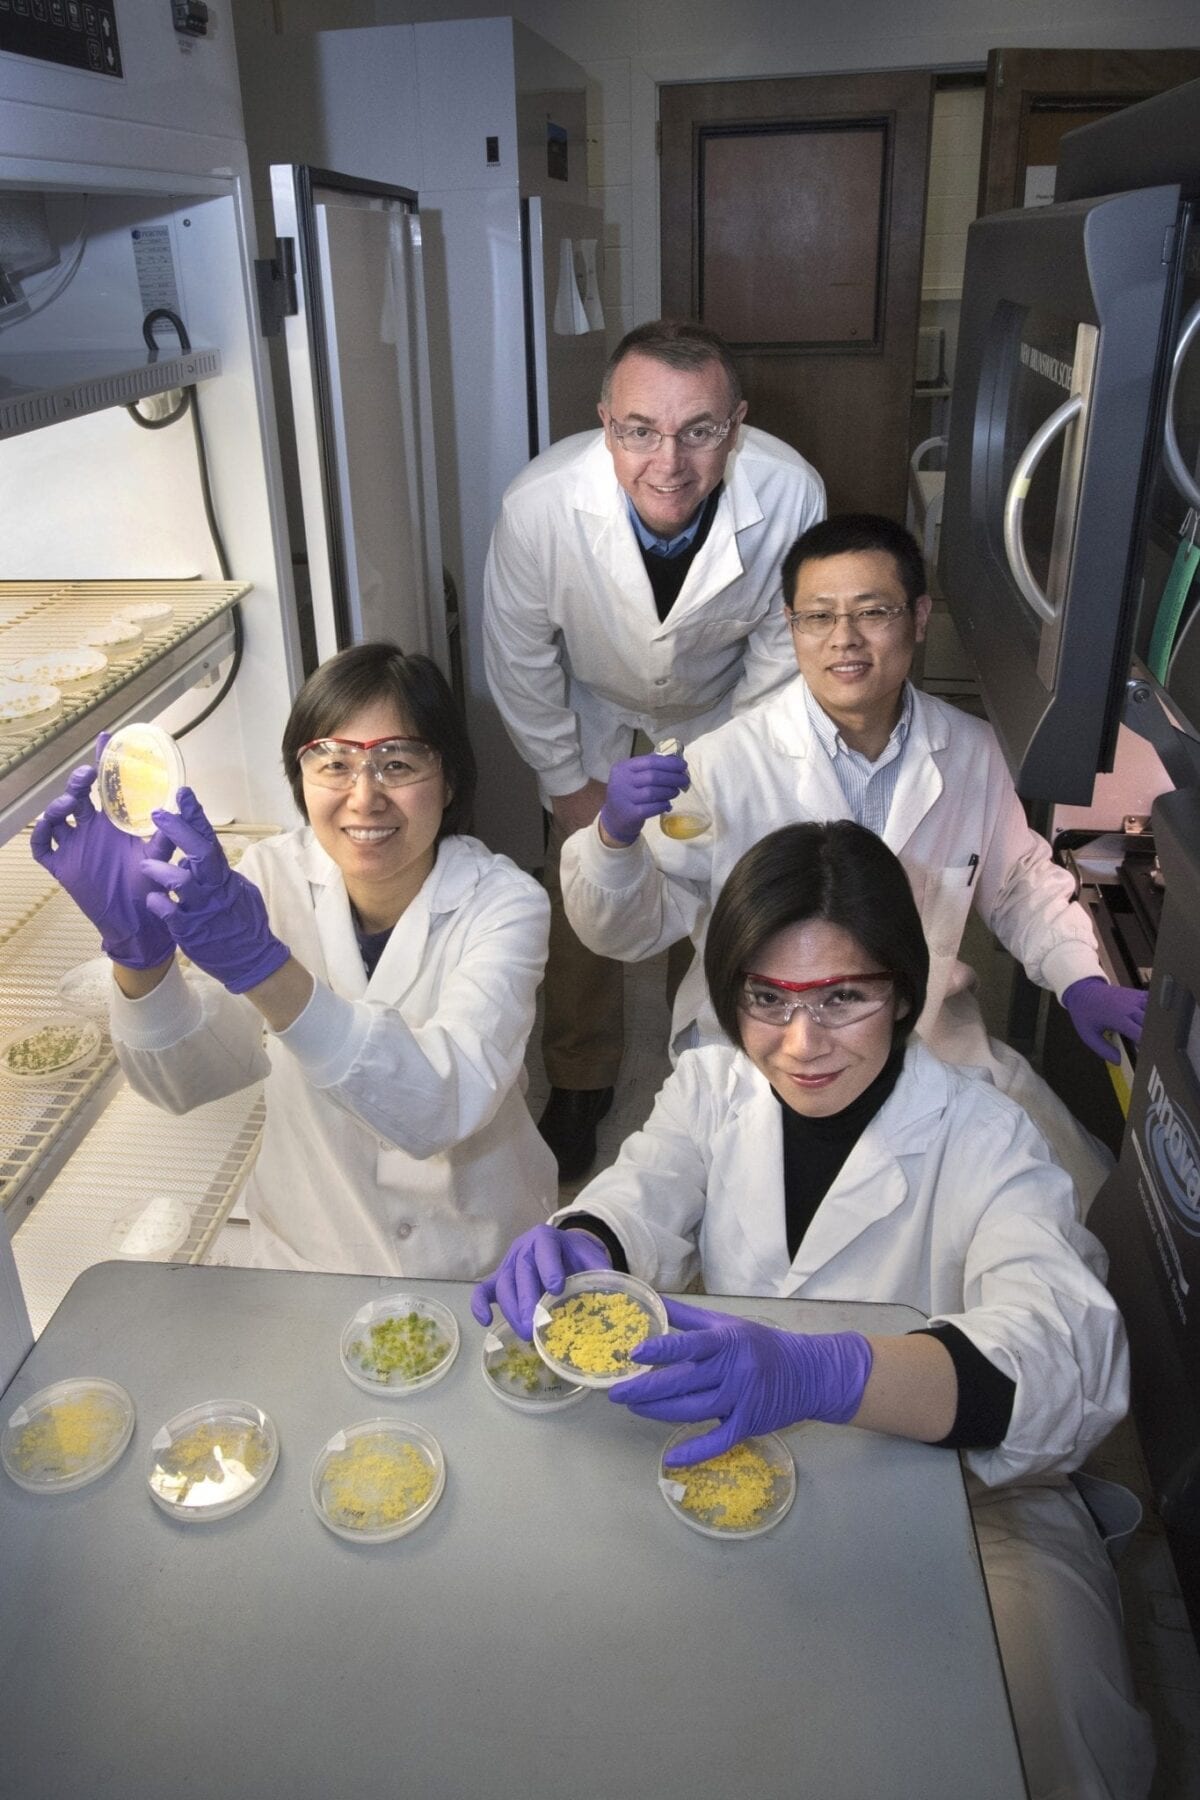 A possible pathway toward generating abundant biofuels and plant-derived bioproducts